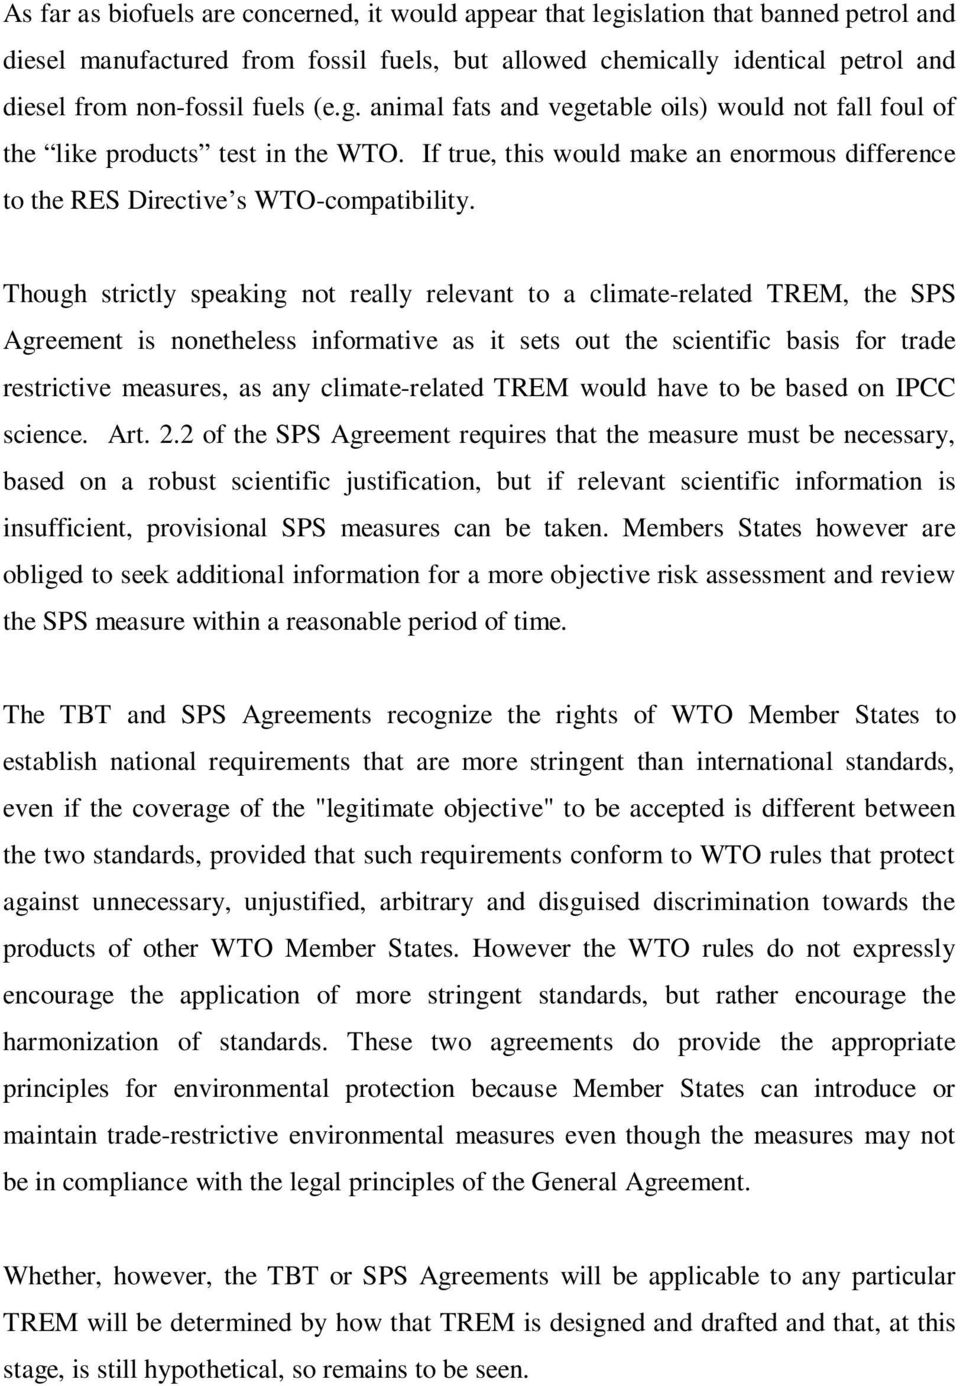 Though strictly speaking not really relevant to a climate-related TREM, the SPS Agreement is nonetheless informative as it sets out the scientific basis for trade restrictive measures, as any